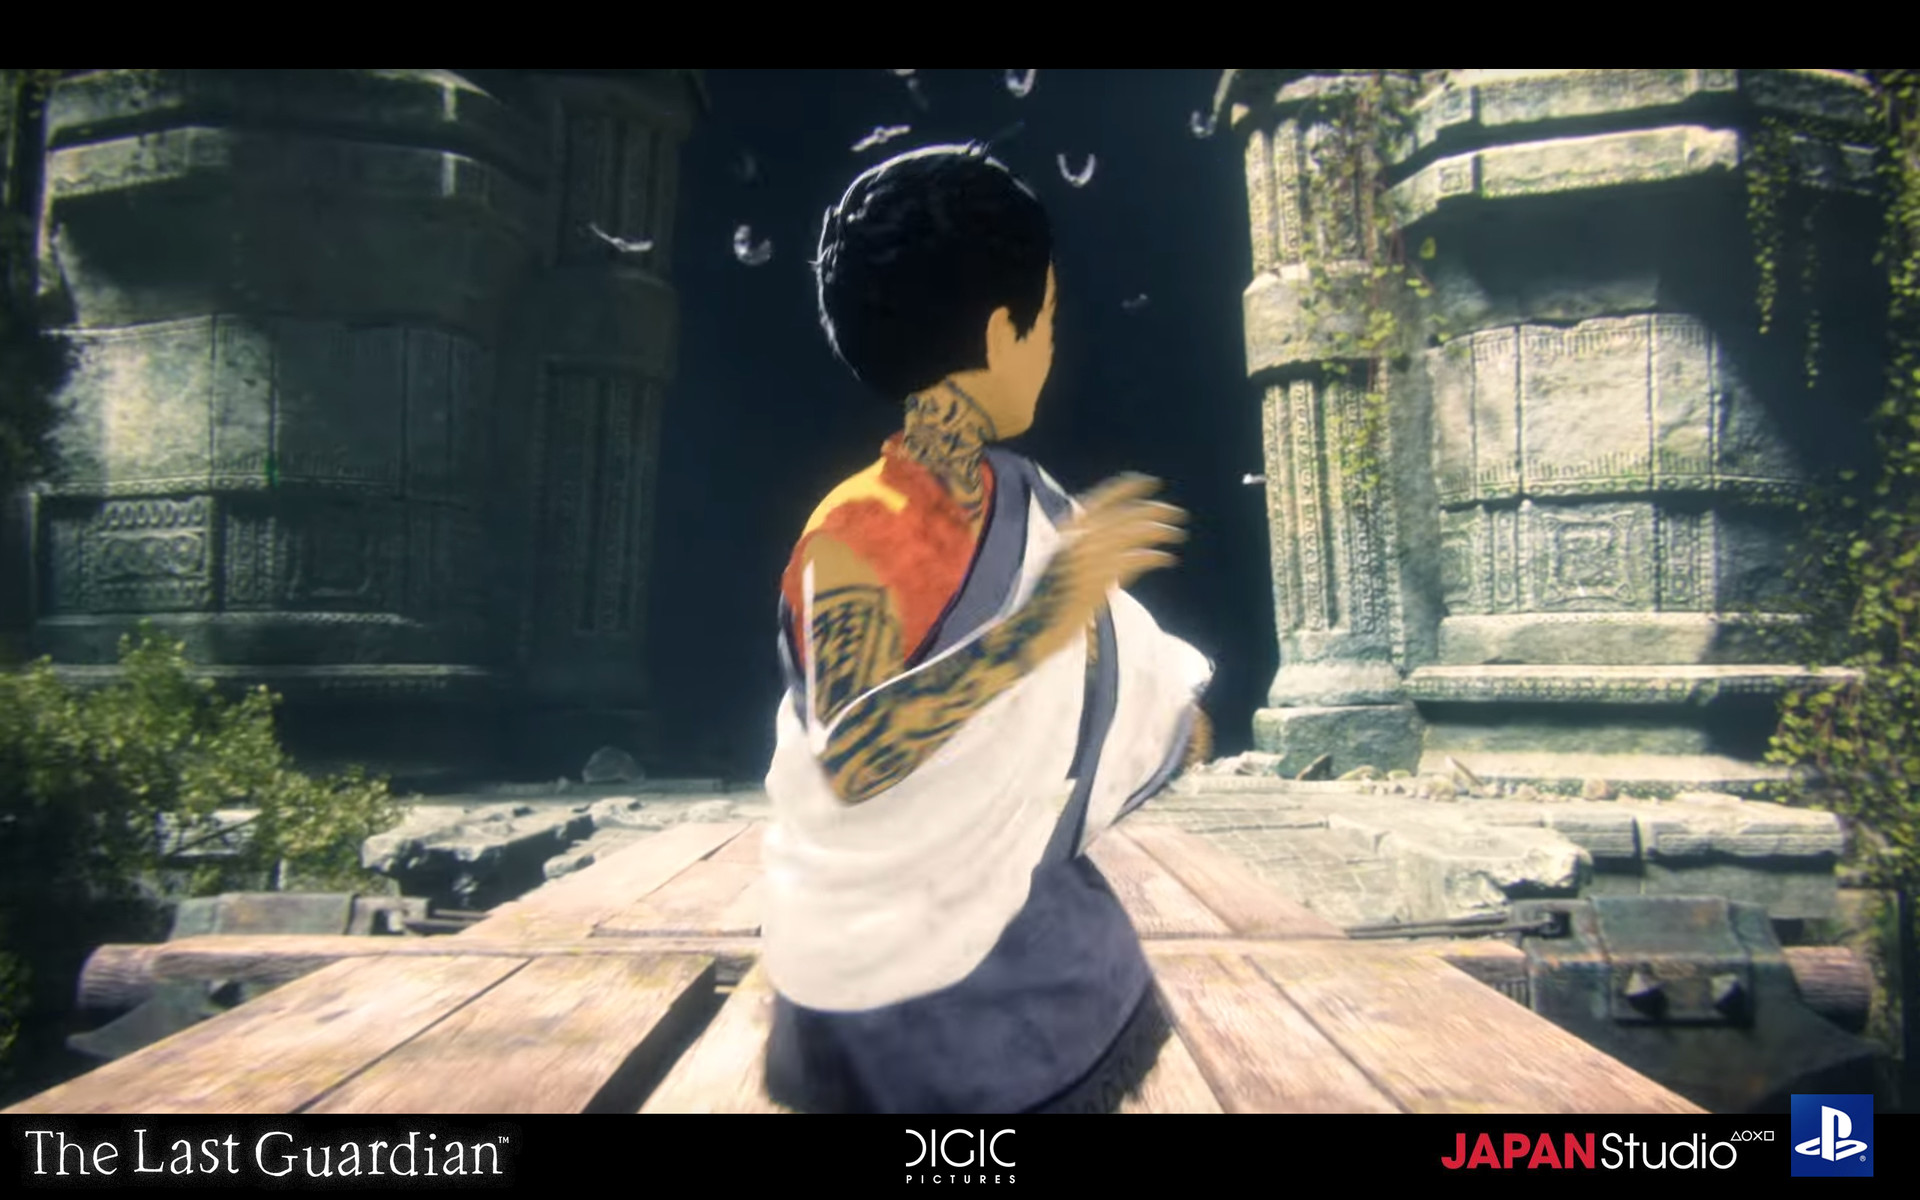 The Last Guardian – Action Gameplay Trailer